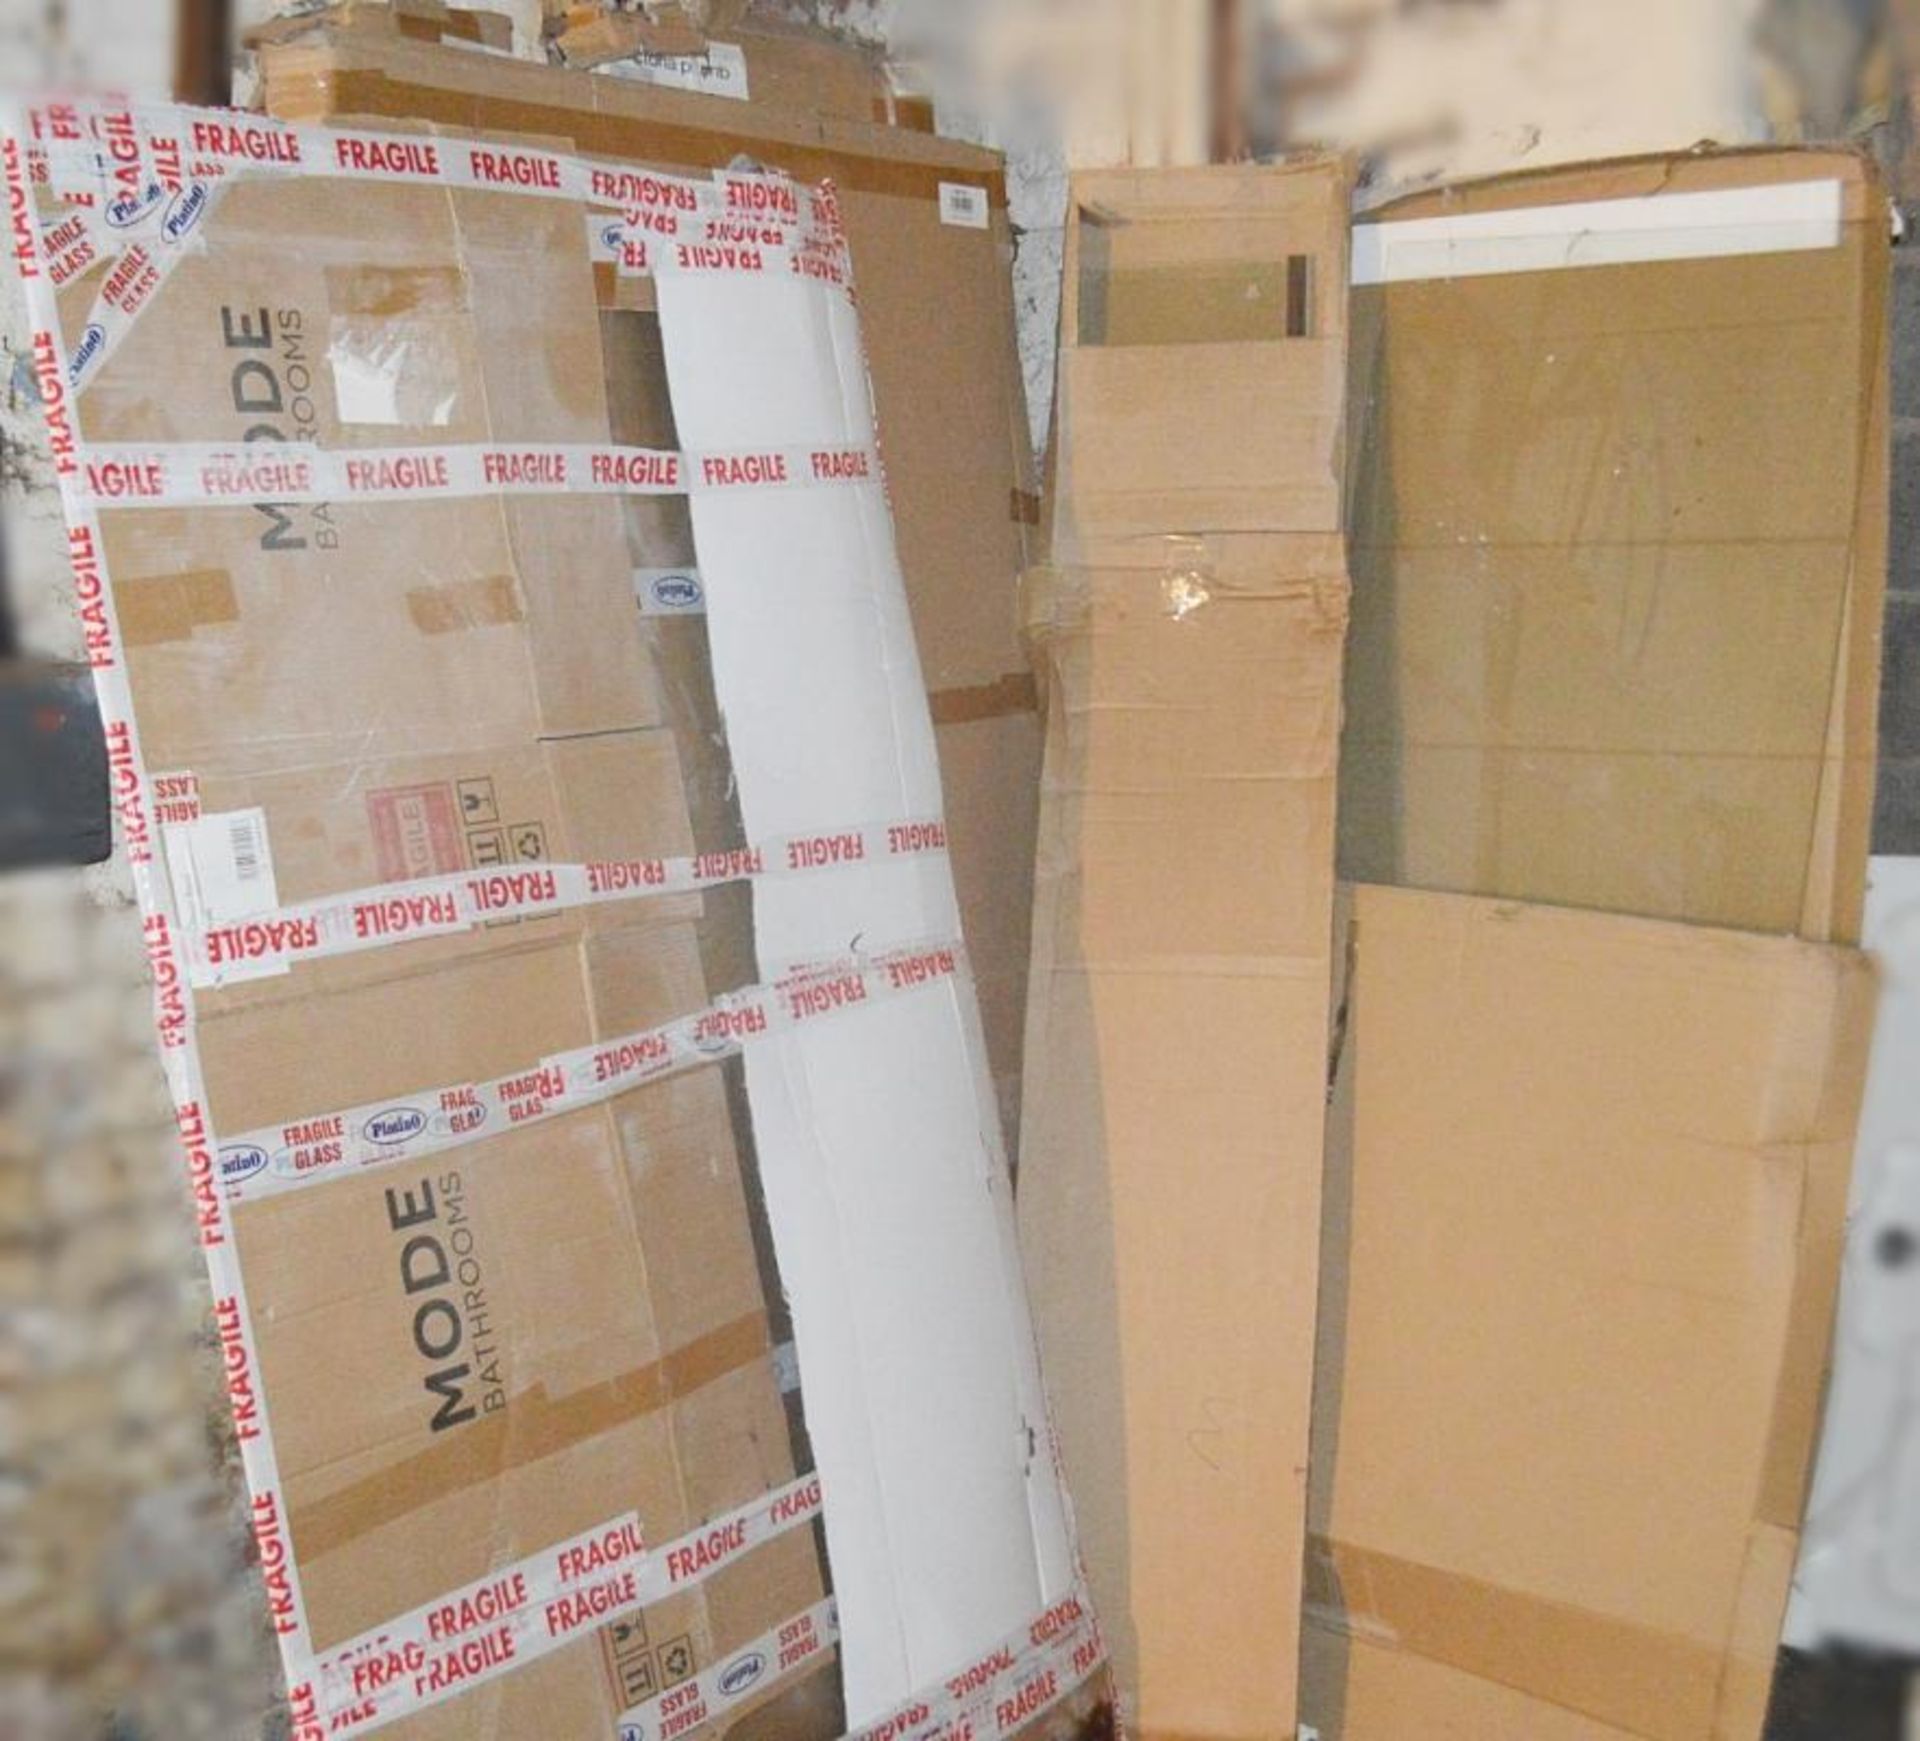 13 x Assorted Shower Screens And Panels - RefMT787 + Ref731 - New / Unused Boxed Stock - CL269 - Loc - Image 2 of 9